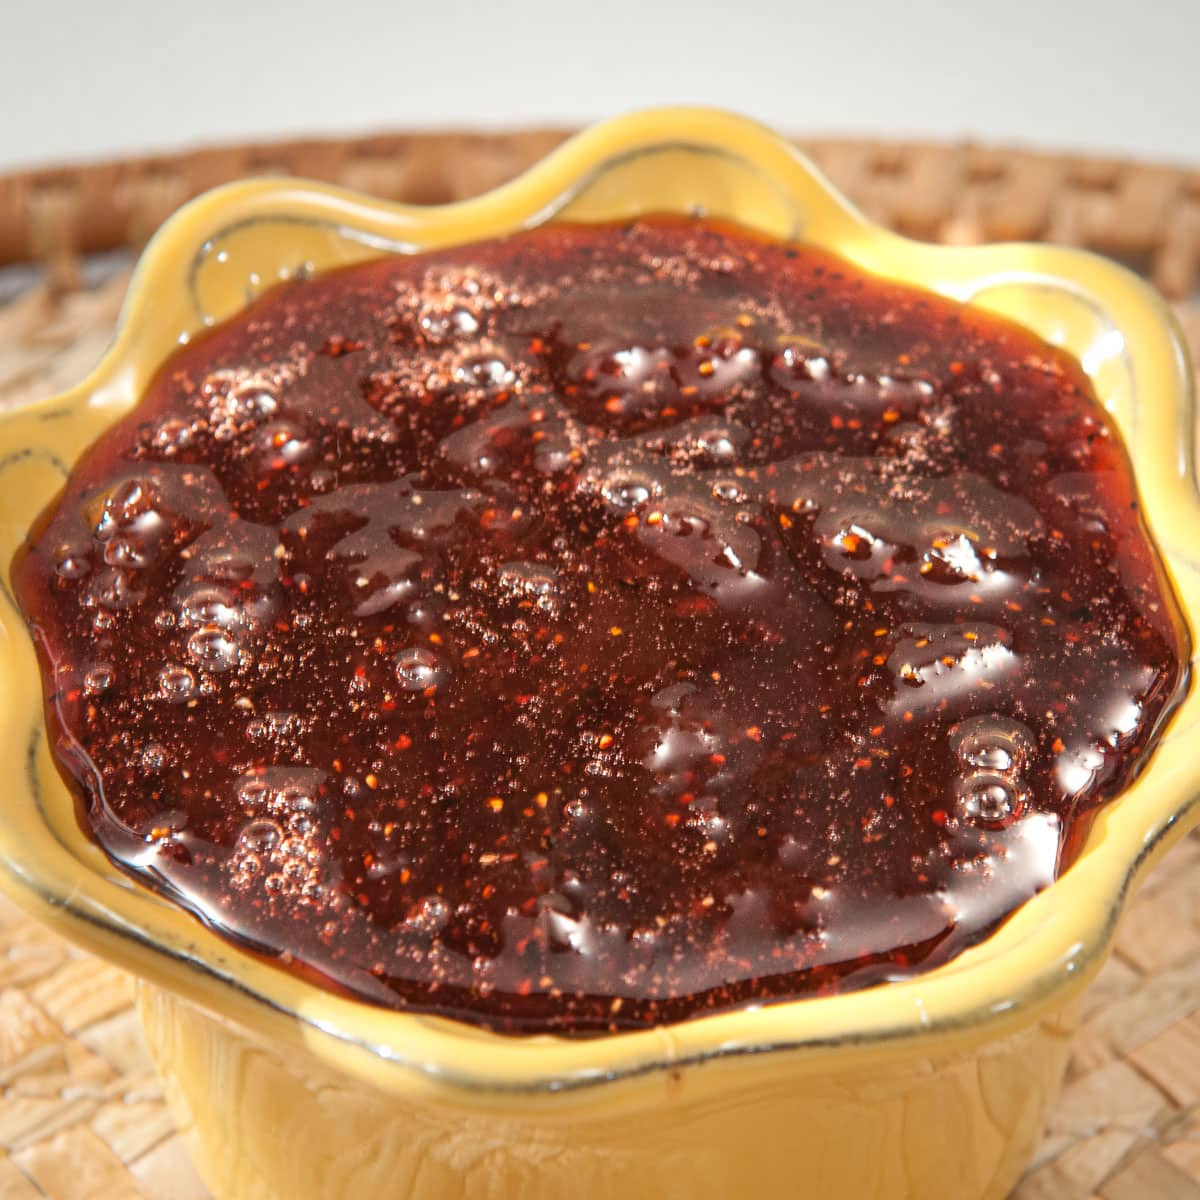 Strawberry Balsamic Jam in a yellow container